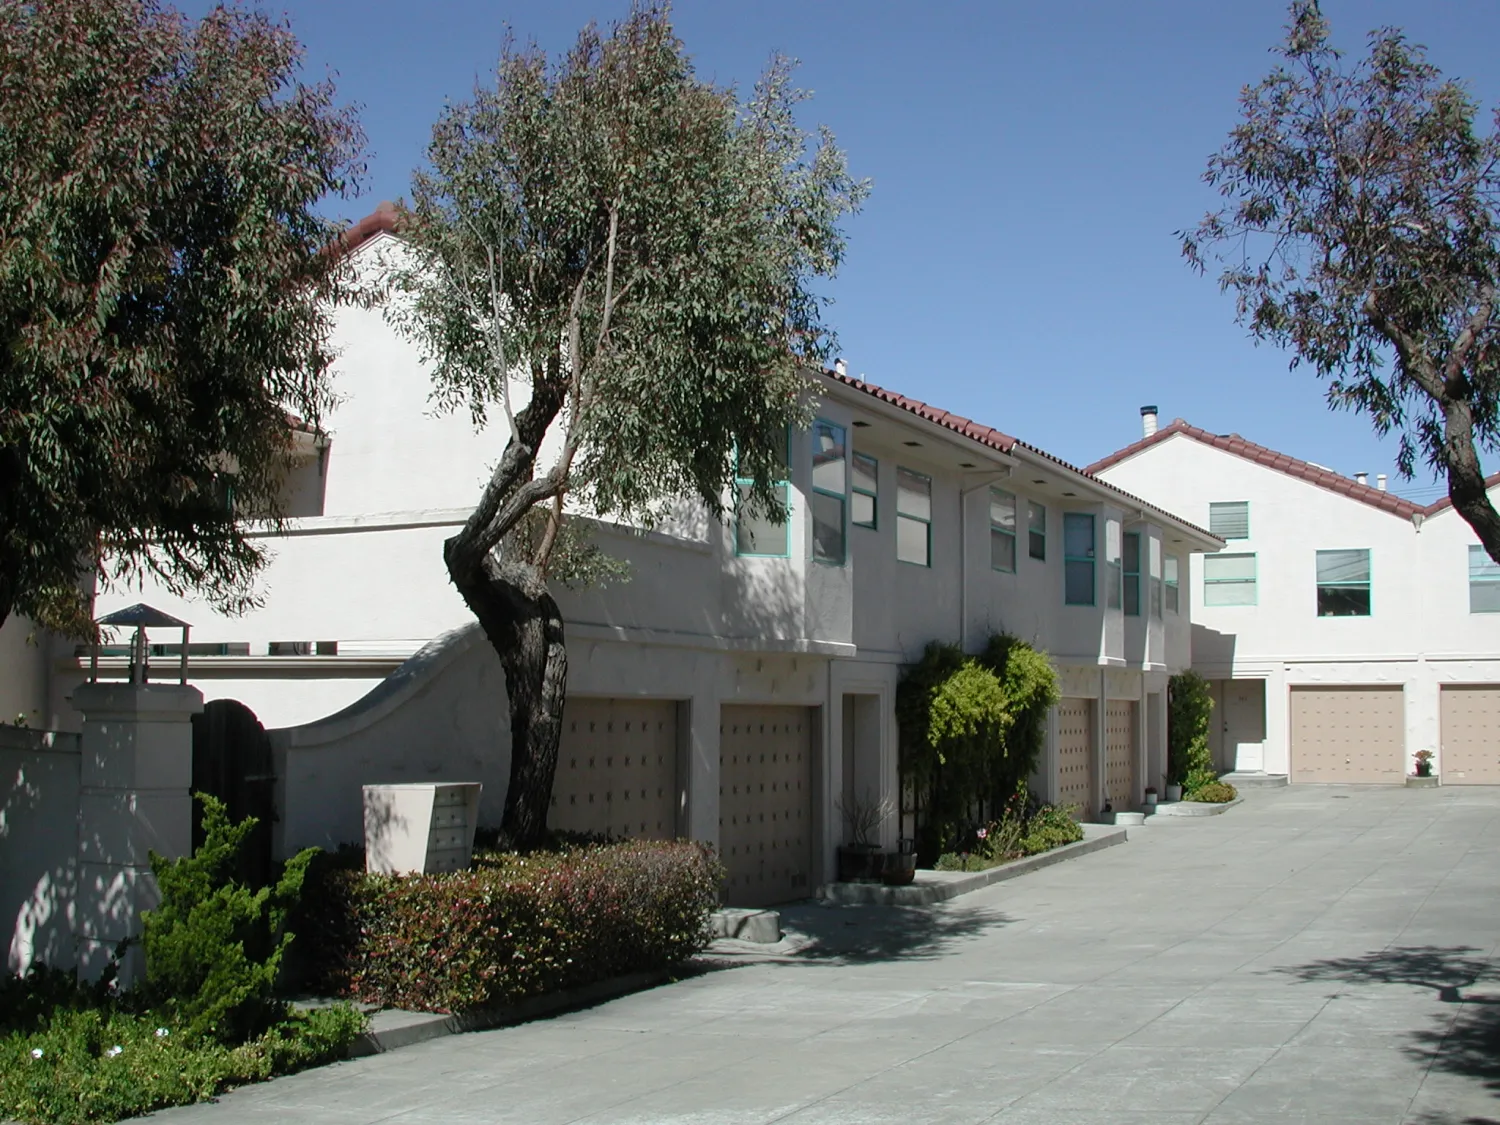 Exterior view of shared pedestrian mews and drive ways at Holloway Terrace in San Francisco.